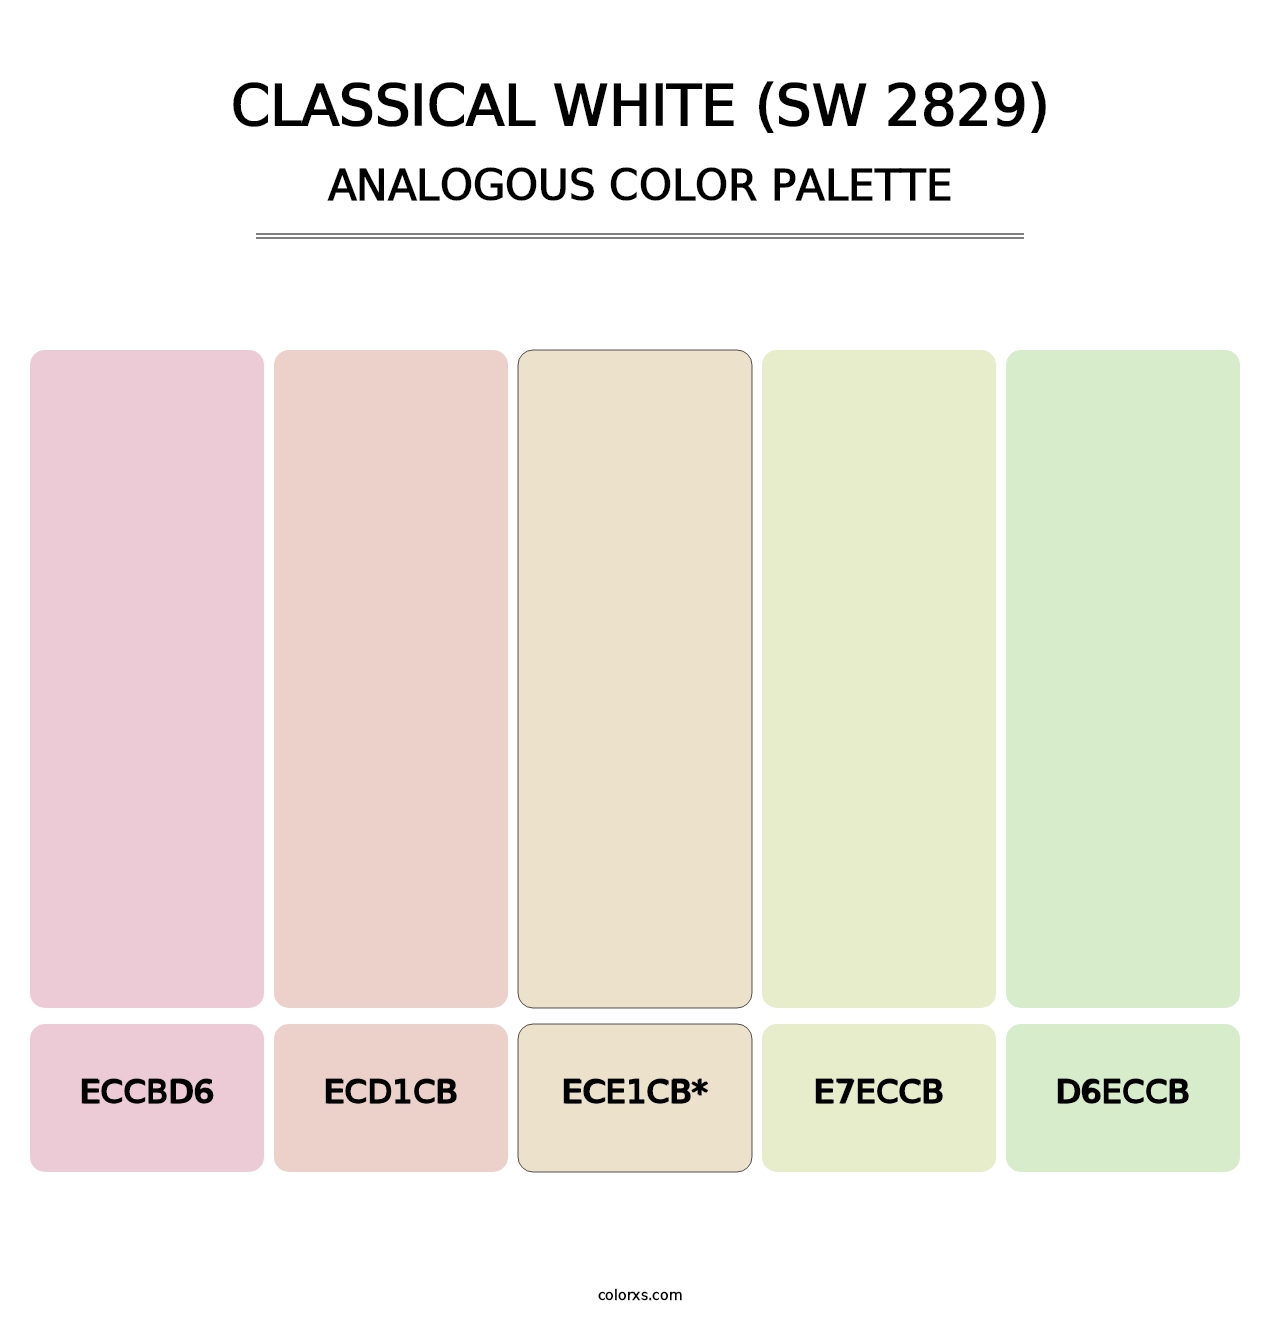 Classical White (SW 2829) - Analogous Color Palette